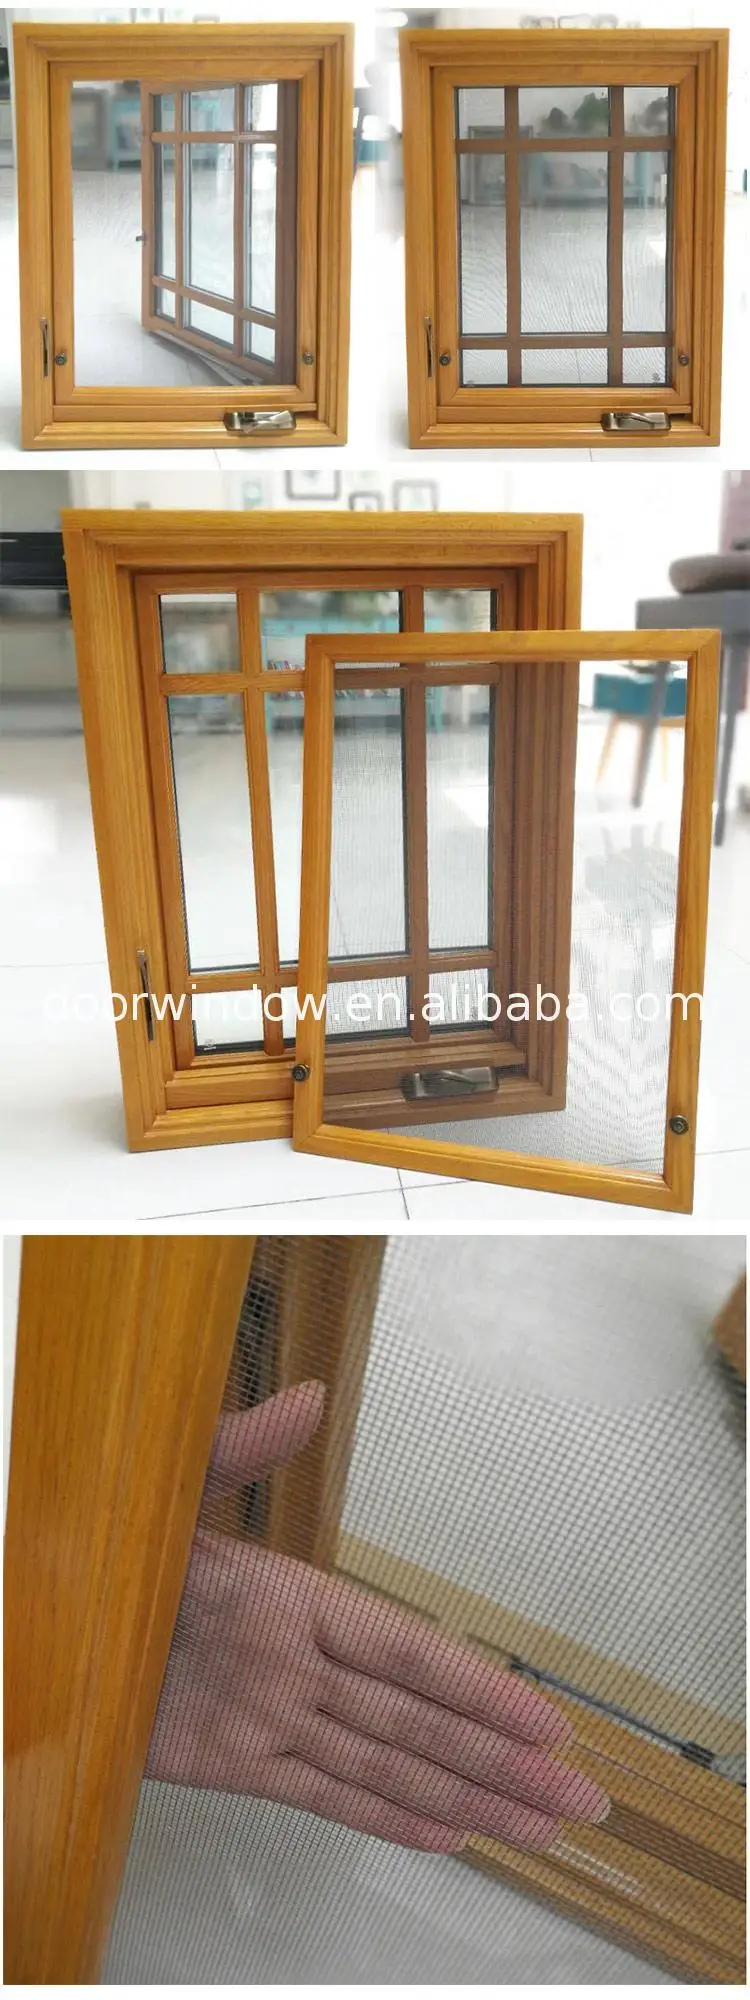 Hot selling product decorative grill design cheap security grilles for windows casement with grills